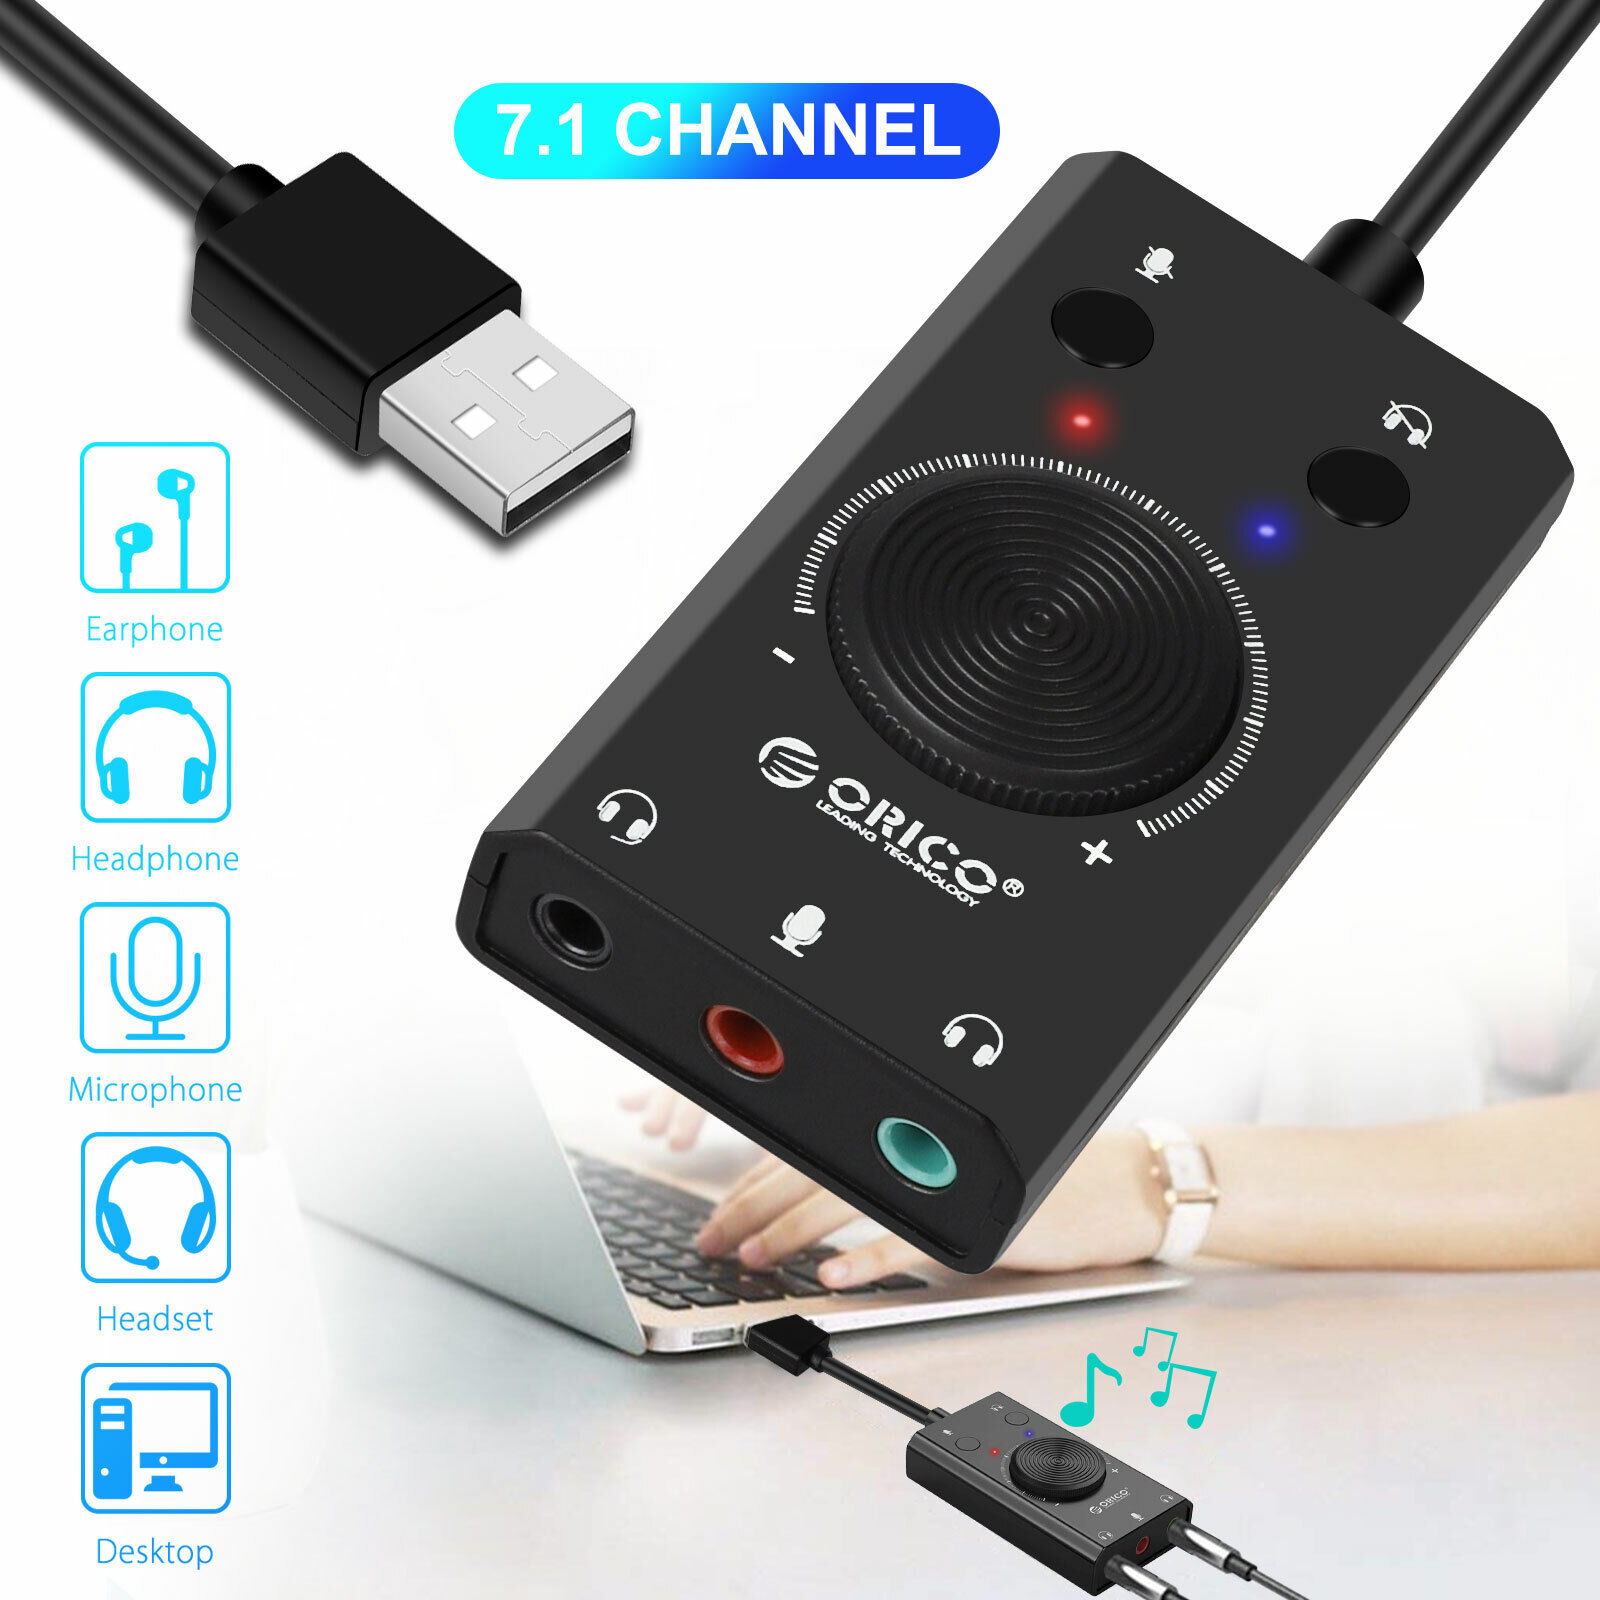 External 7.1 Channel USB 2.0 Stereo Audio Adapter Sound Card for 3.5mm Headphone